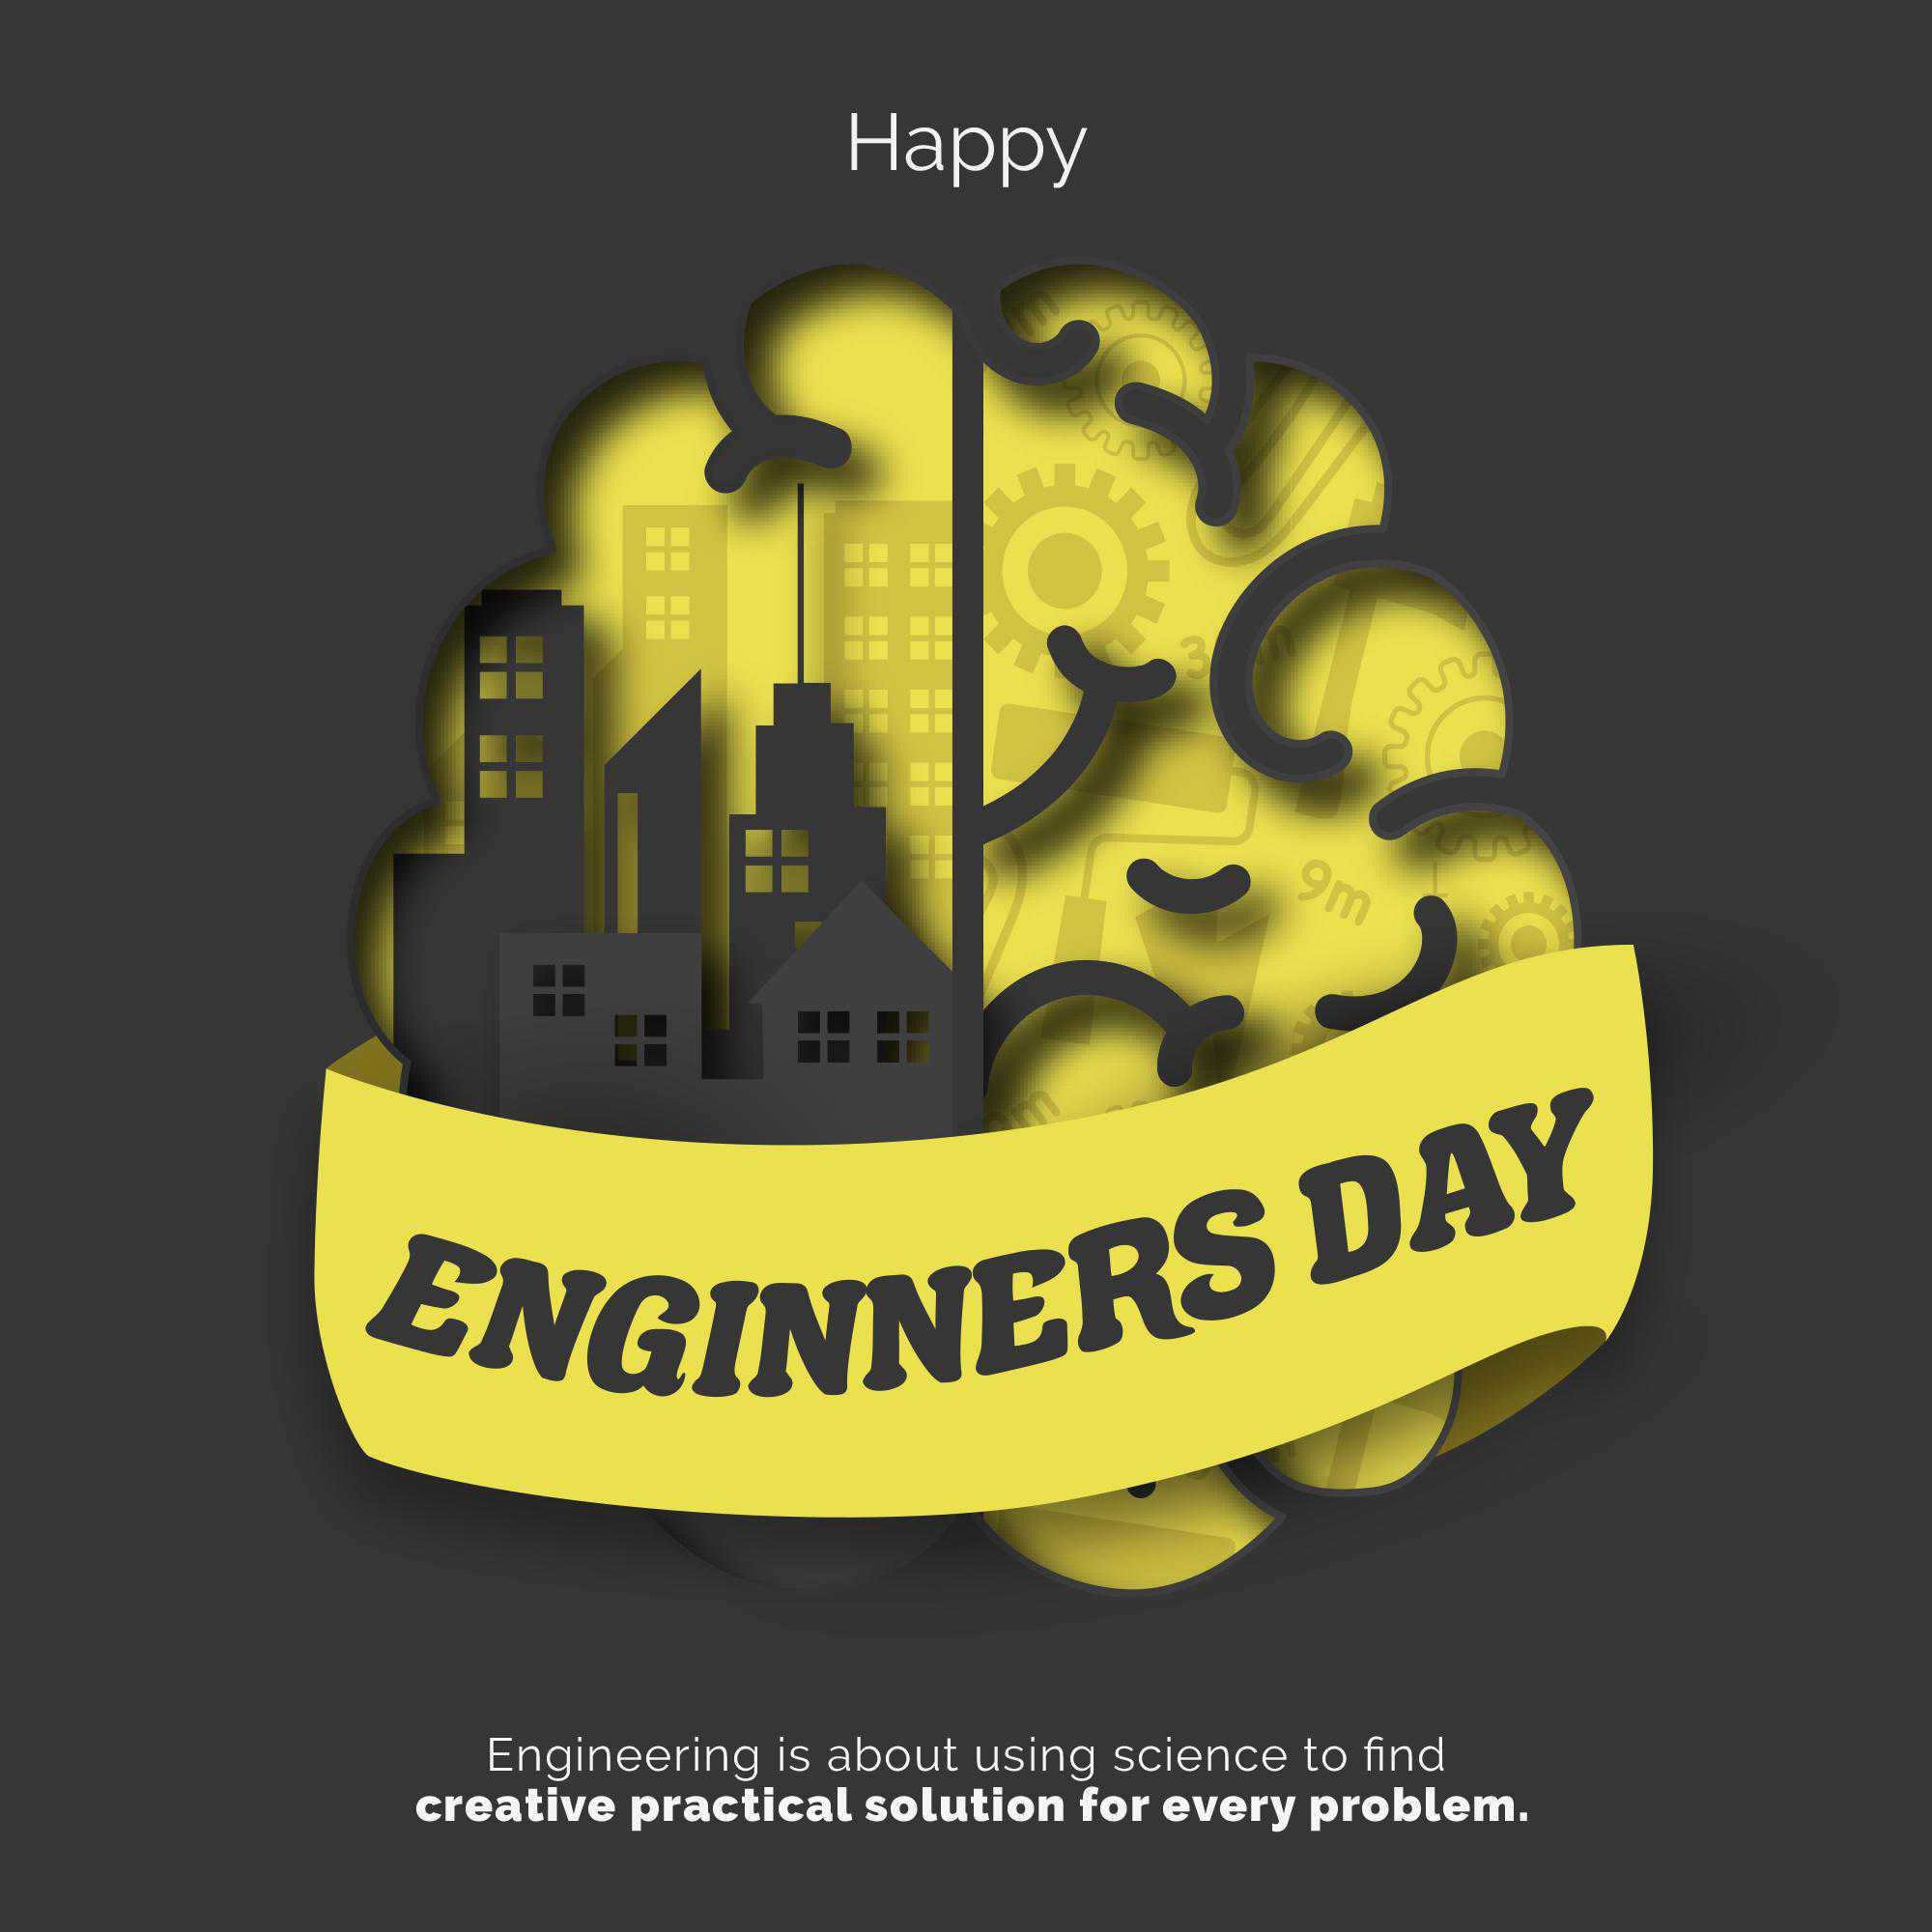 Happy Engineer's Day images